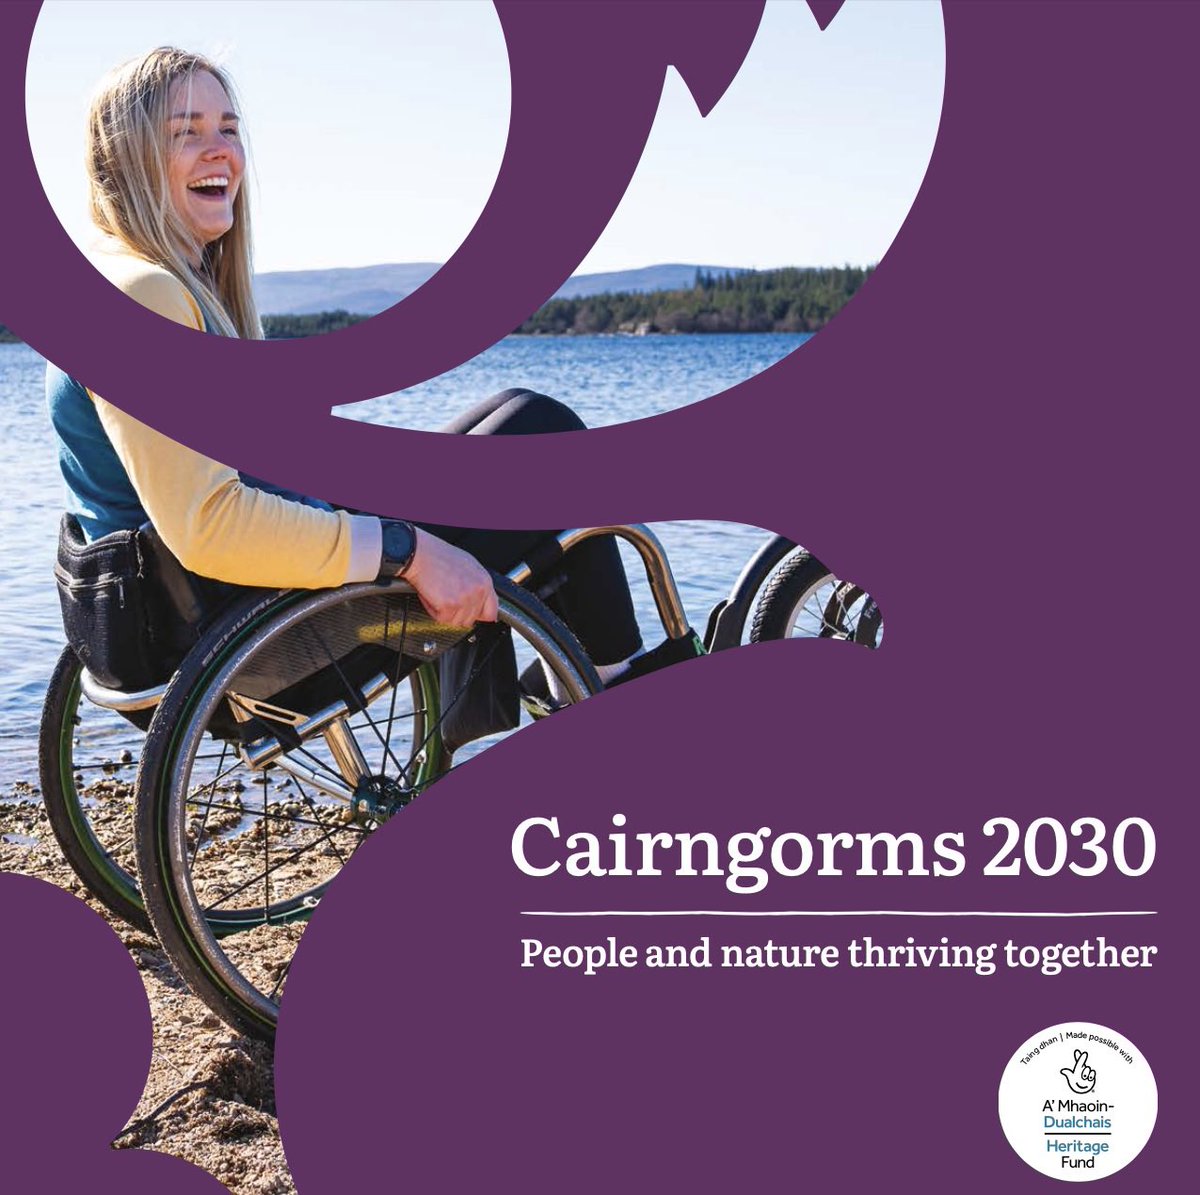 #Cairngorms2030 @cairngormsnews is seeking to appoint a consultancy to develop, submit and guide planning applications for two large-scale river and floodplain restoration projects in Deeside and Strathspey. @HeritageFundSCO publiccontractsscotland.gov.uk/search/show/se…